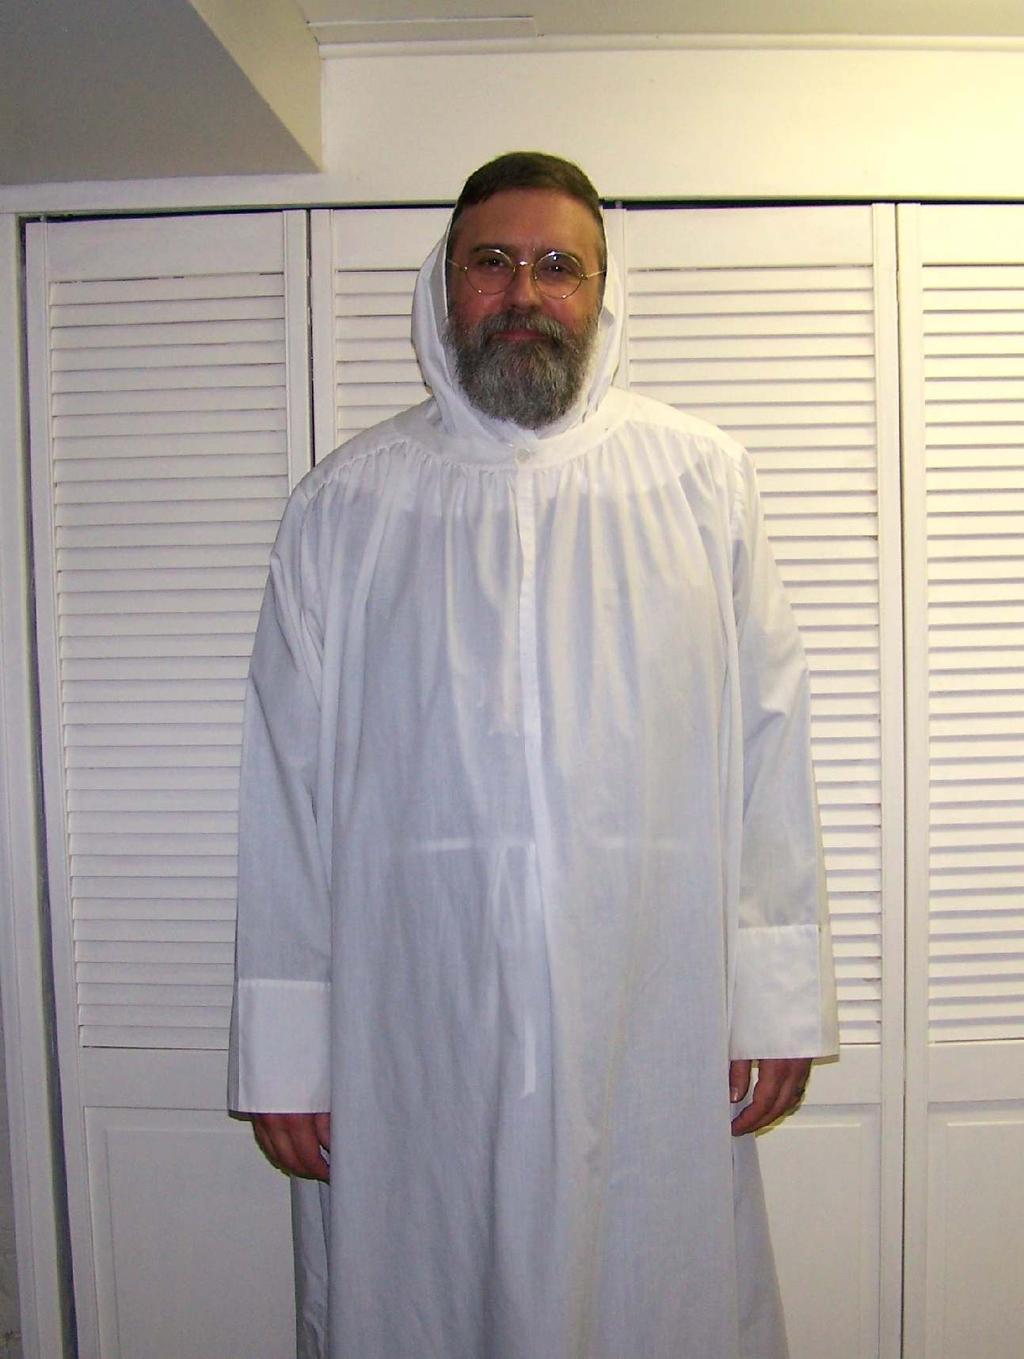 He next puts on e alb, from e Latin alba - as it is a white vestment or robe symbolizing purity. The alb evolved from e old Roman under-tunic and has always been worn by e church s ministers.